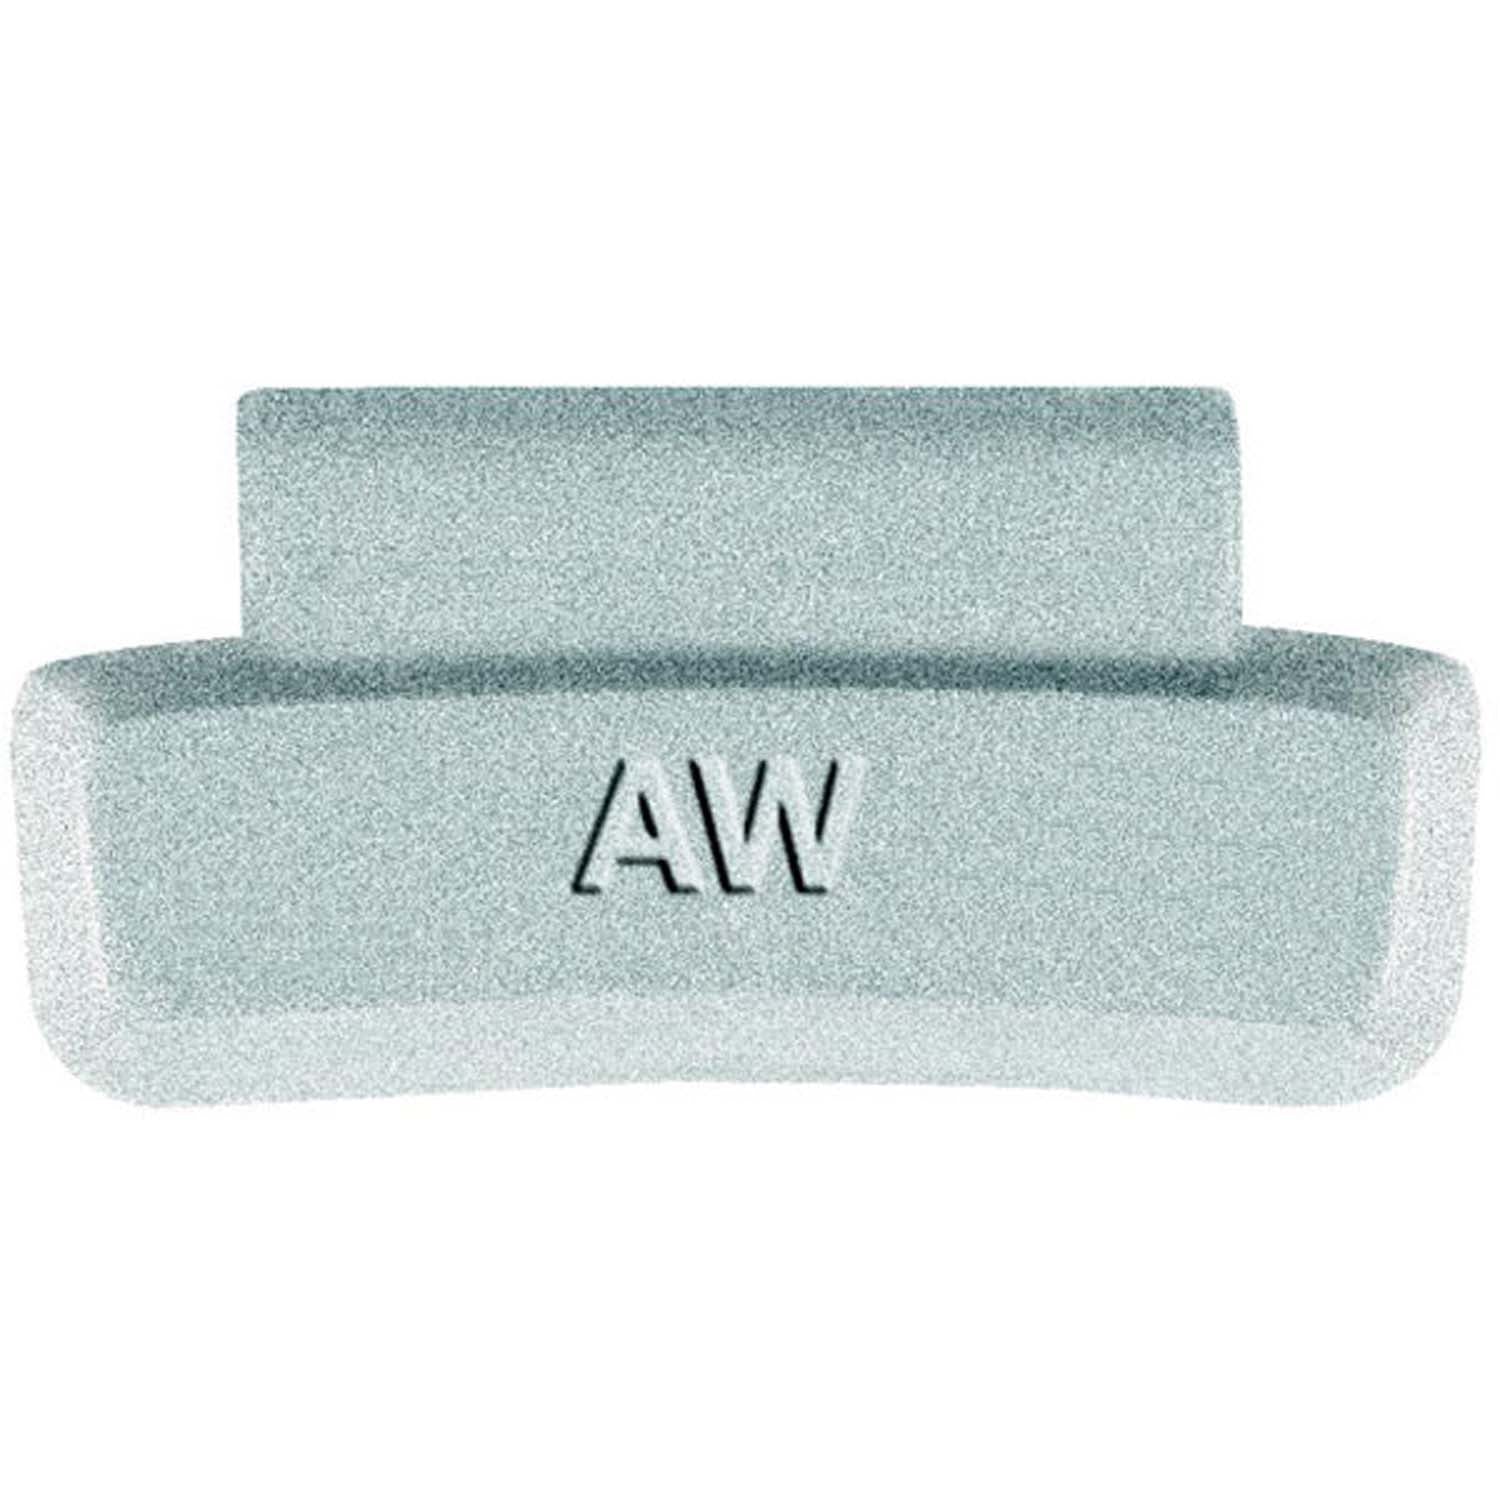 Perfect Equipment AW200N Coated Lead Wheel Weight 2.00 oz. - Box of 25